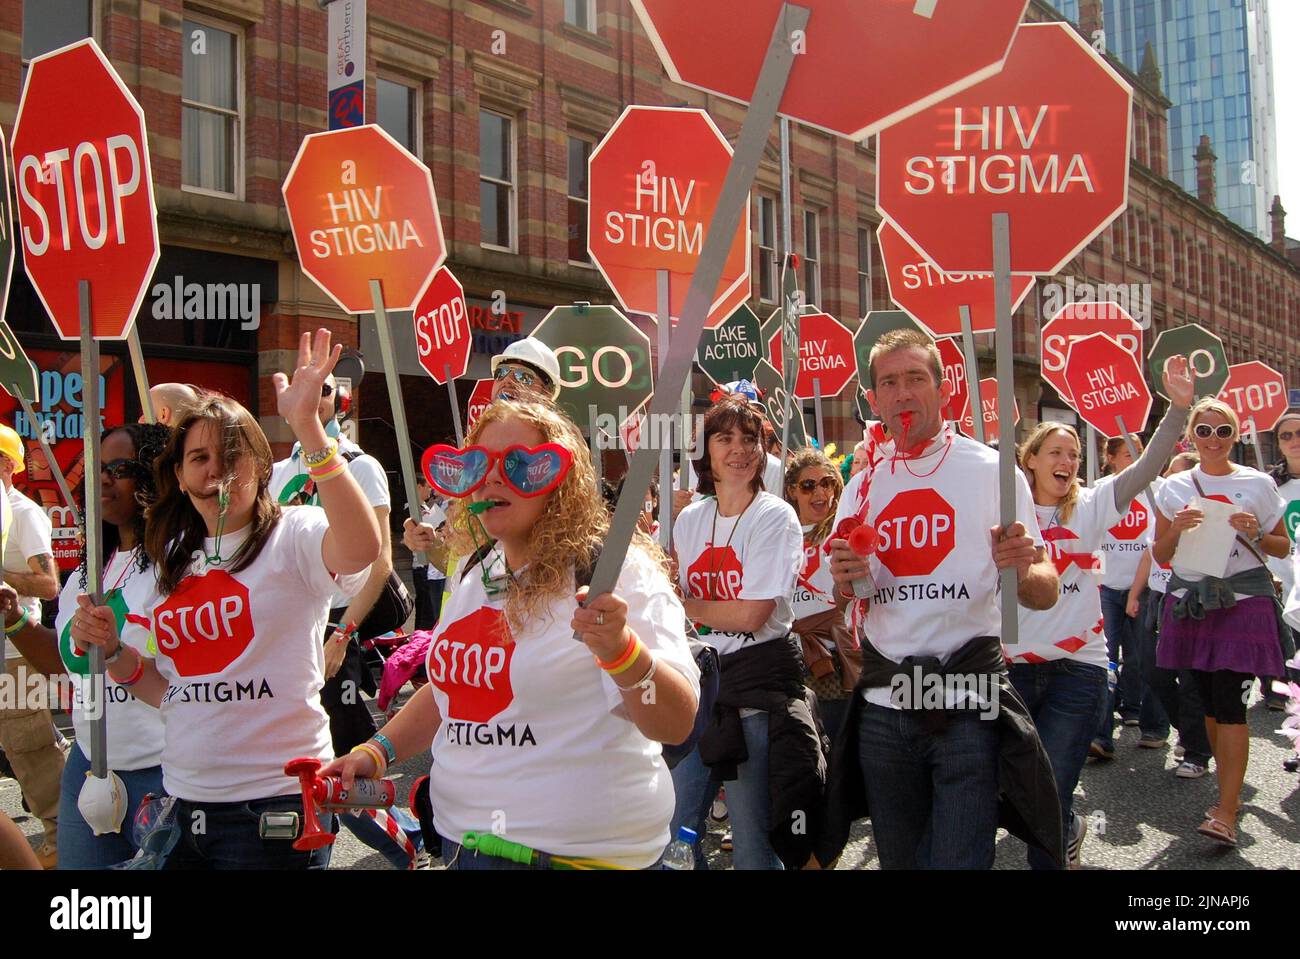 A walking float of people from the George House Trust carrying 'Stop HIV Stigma' placards and wearing t shirts with the same message in Manchester, UK, taking part in the LGBT Pride Parade on August 29, 2009. George House Trust provides services to people living with, and affected by, HIV. Stock Photo